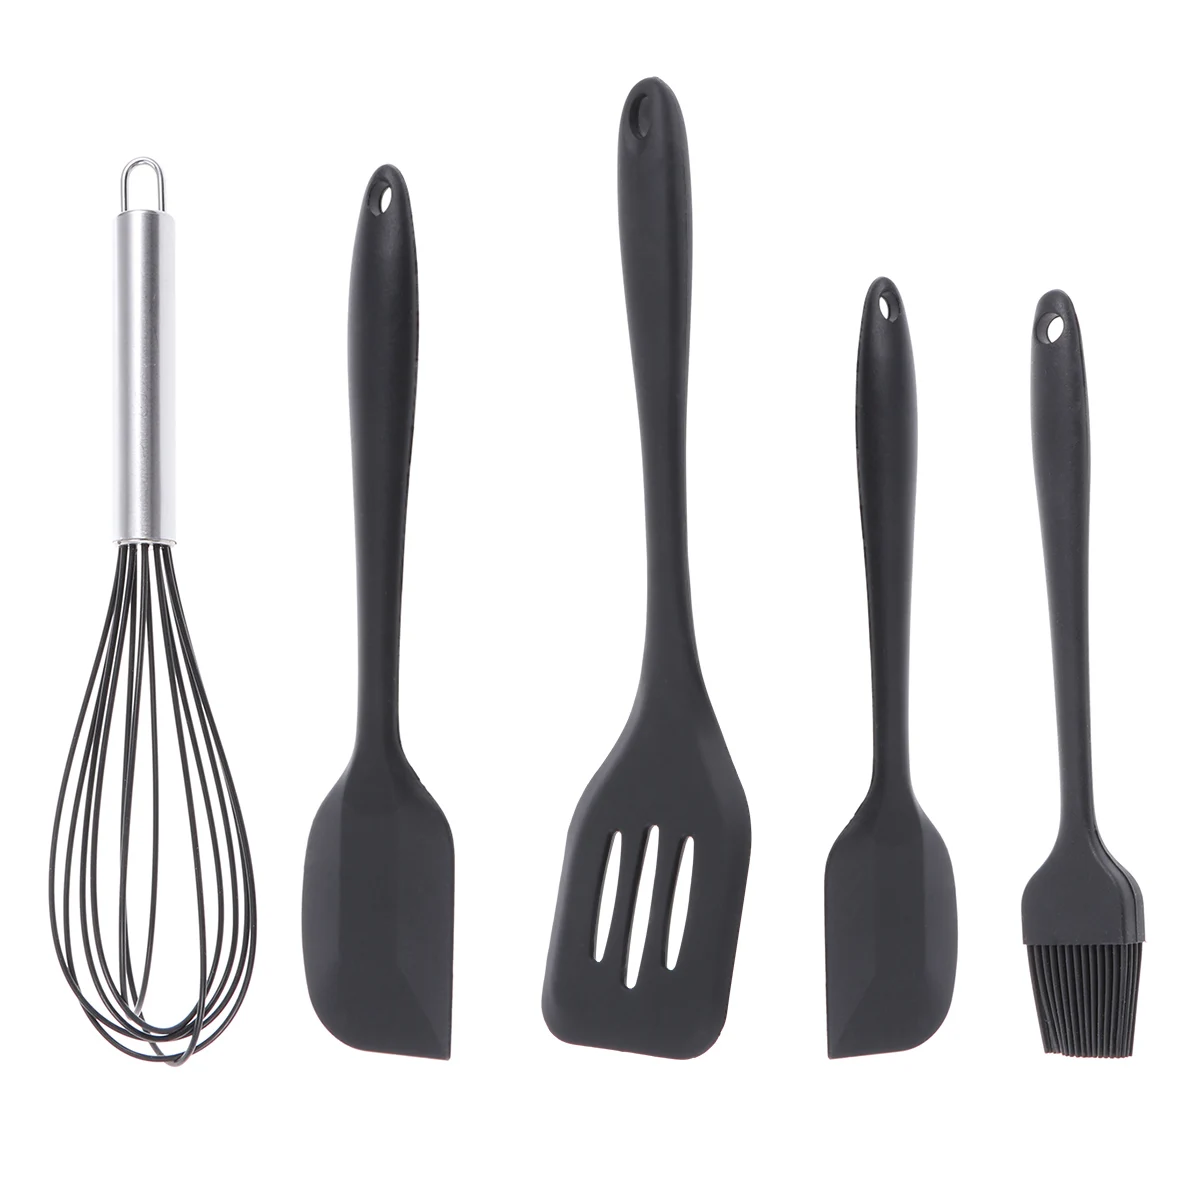 5pcs Silicone Baking Utensil Set Cooking Tools Cookware Kitchen Gadgets Cooking Spatula Turner Mixing Spoon Slotted Spoon Ladle - Цвет: Black